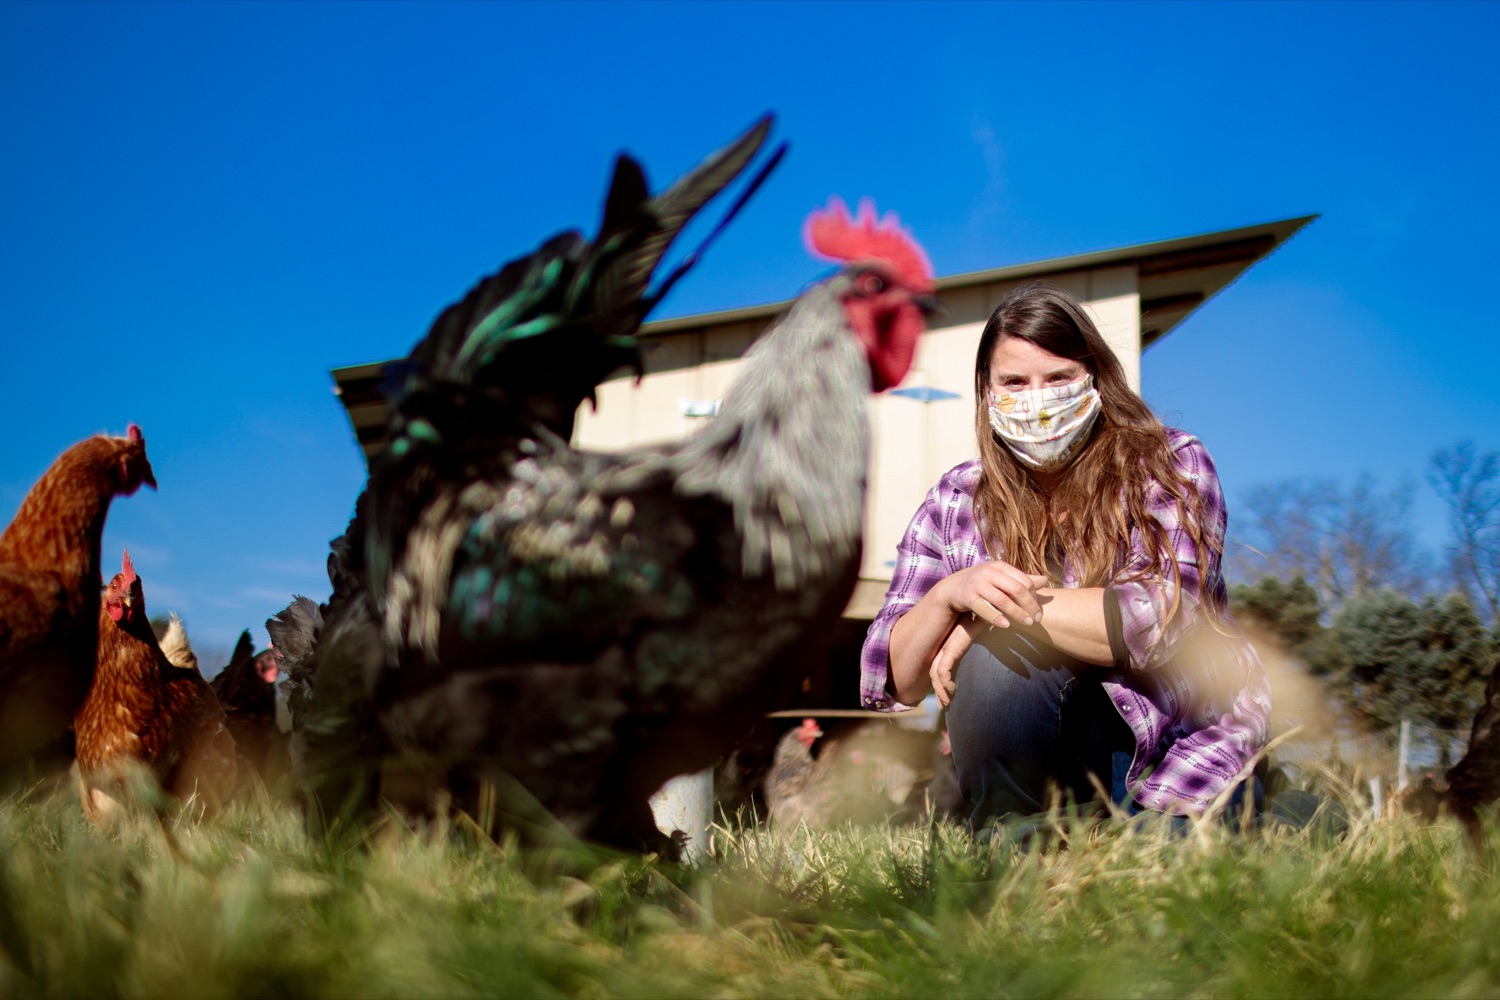 Liz Wagner, owner-operator of Crooked Row Farm, feeds the chickens at the farm in Orefield on Friday, November 20, 2020.<br><a href="https://filesource.amperwave.net/commonwealthofpa/photo/18325_AGRIC_Farm_Show_NK_003.jpg" target="_blank">⇣ Download Photo</a>